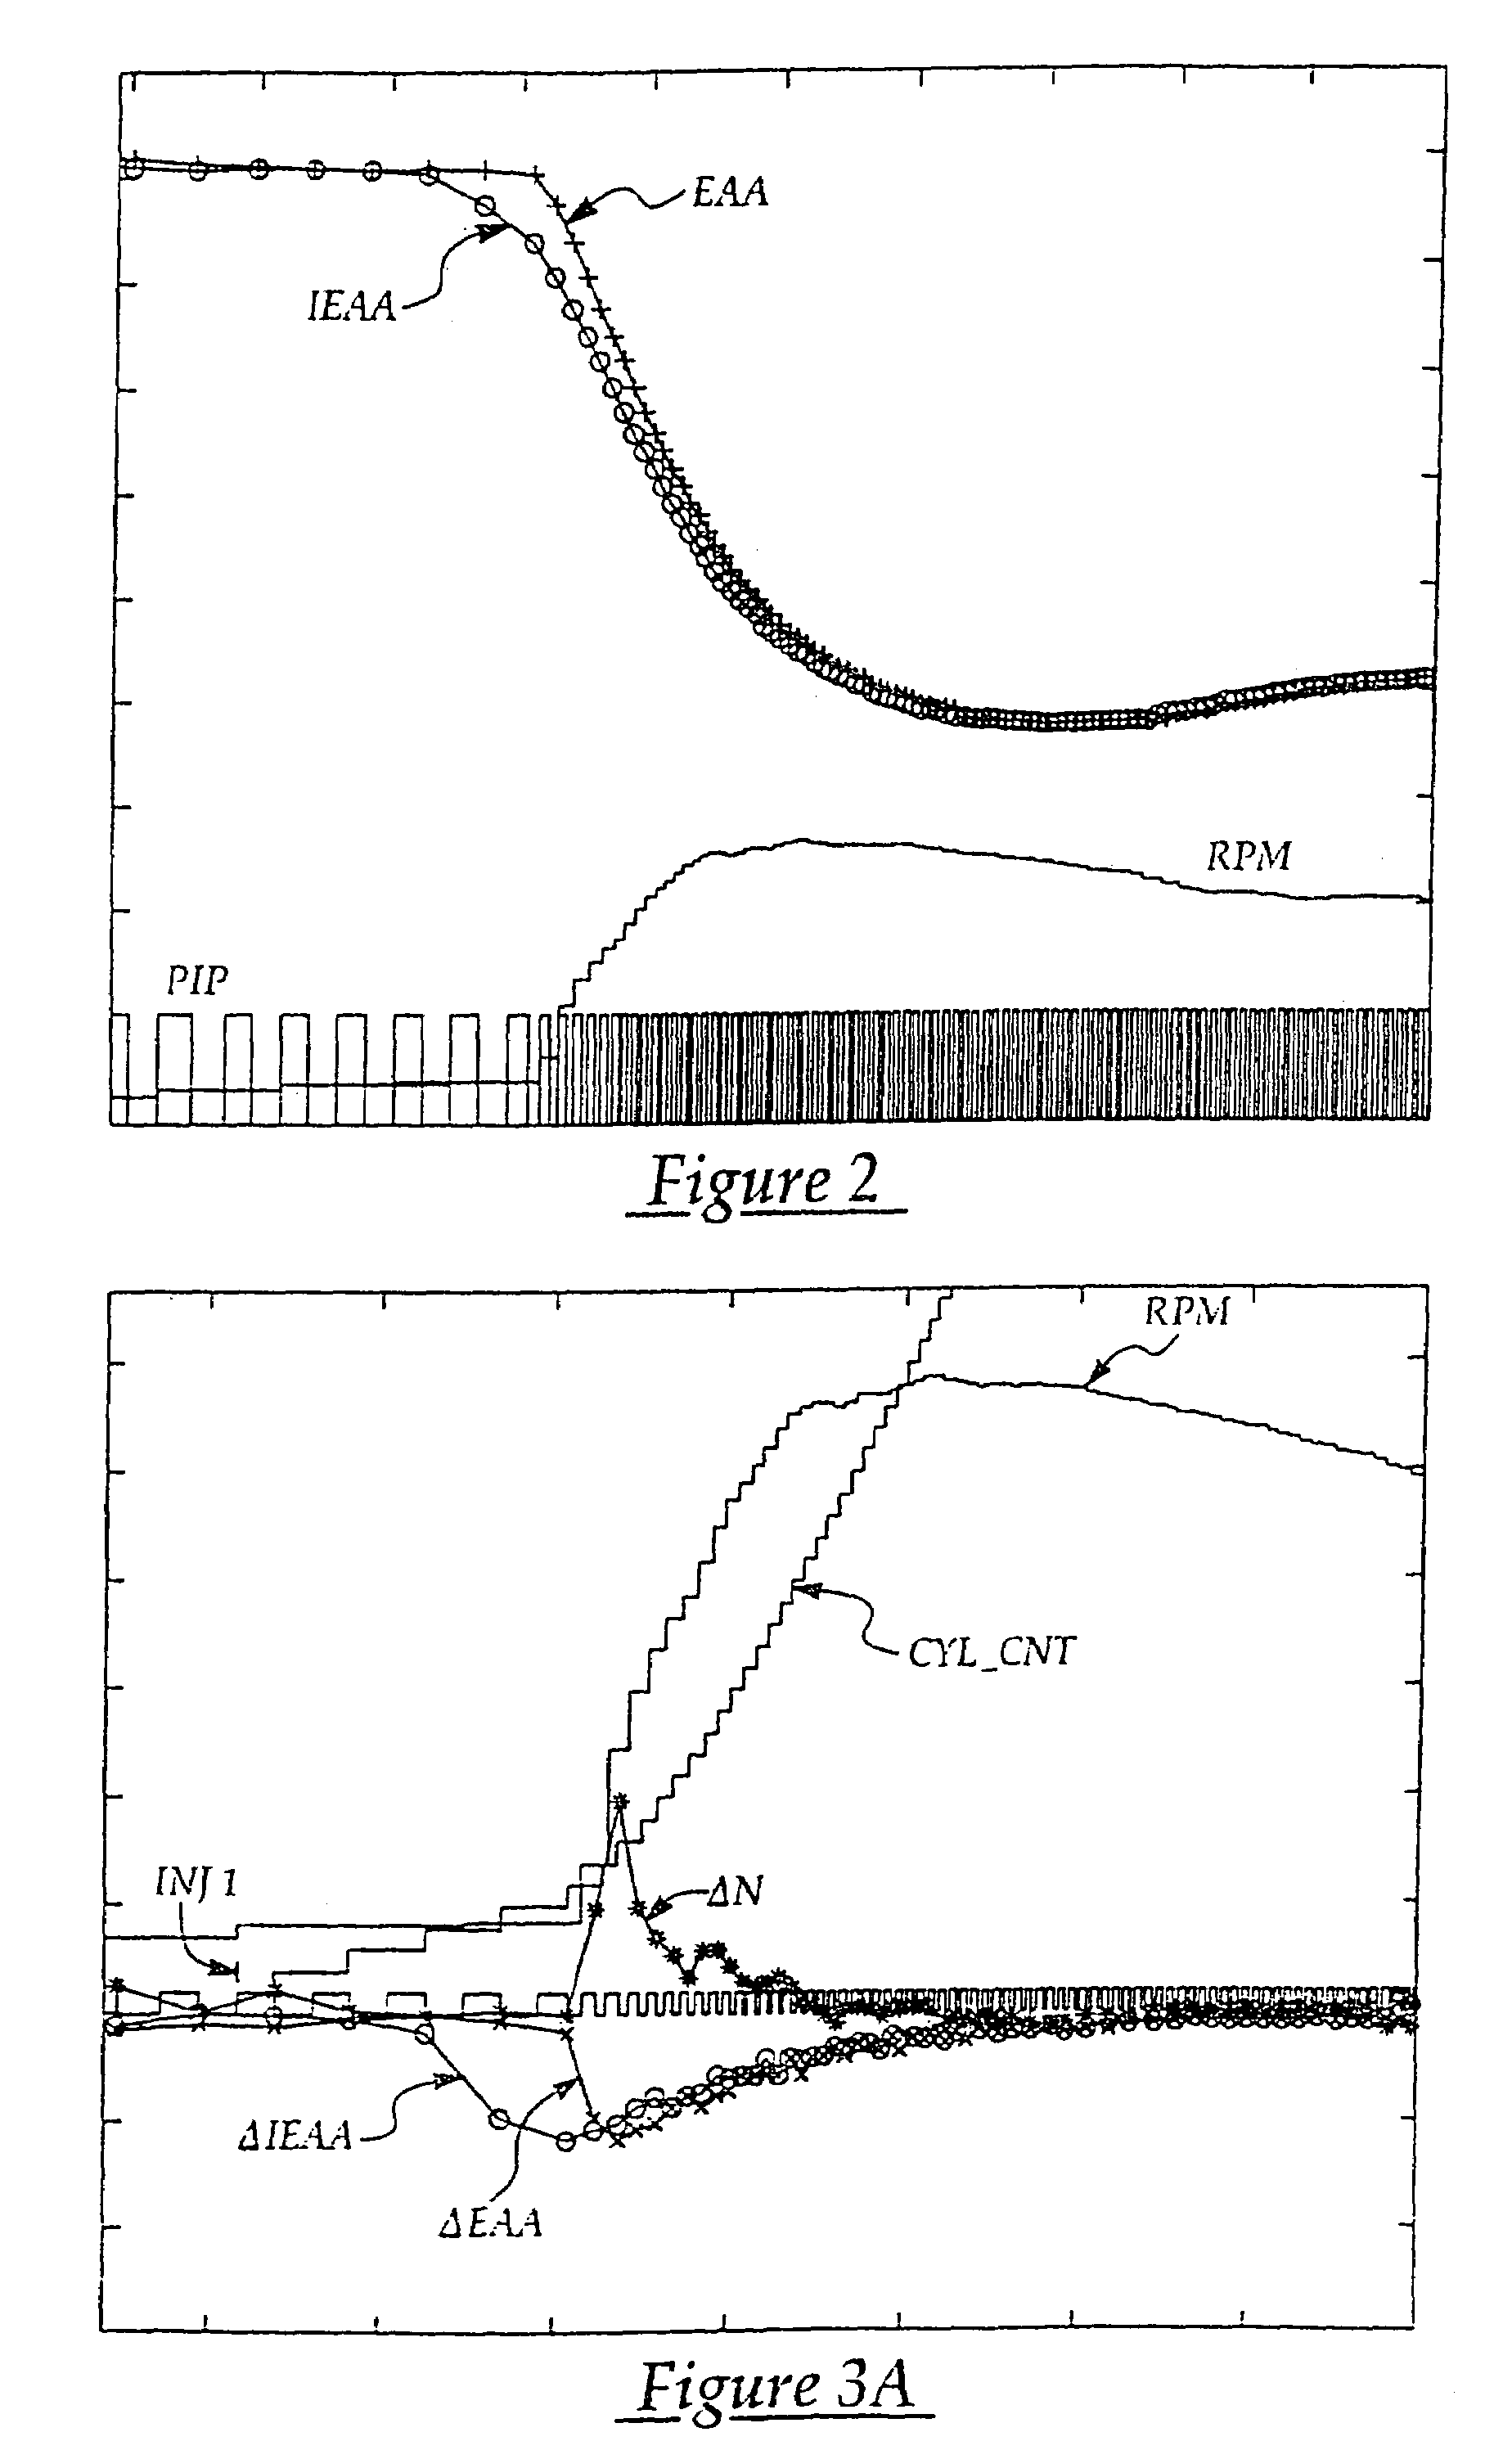 Engine air amount prediction based on engine position